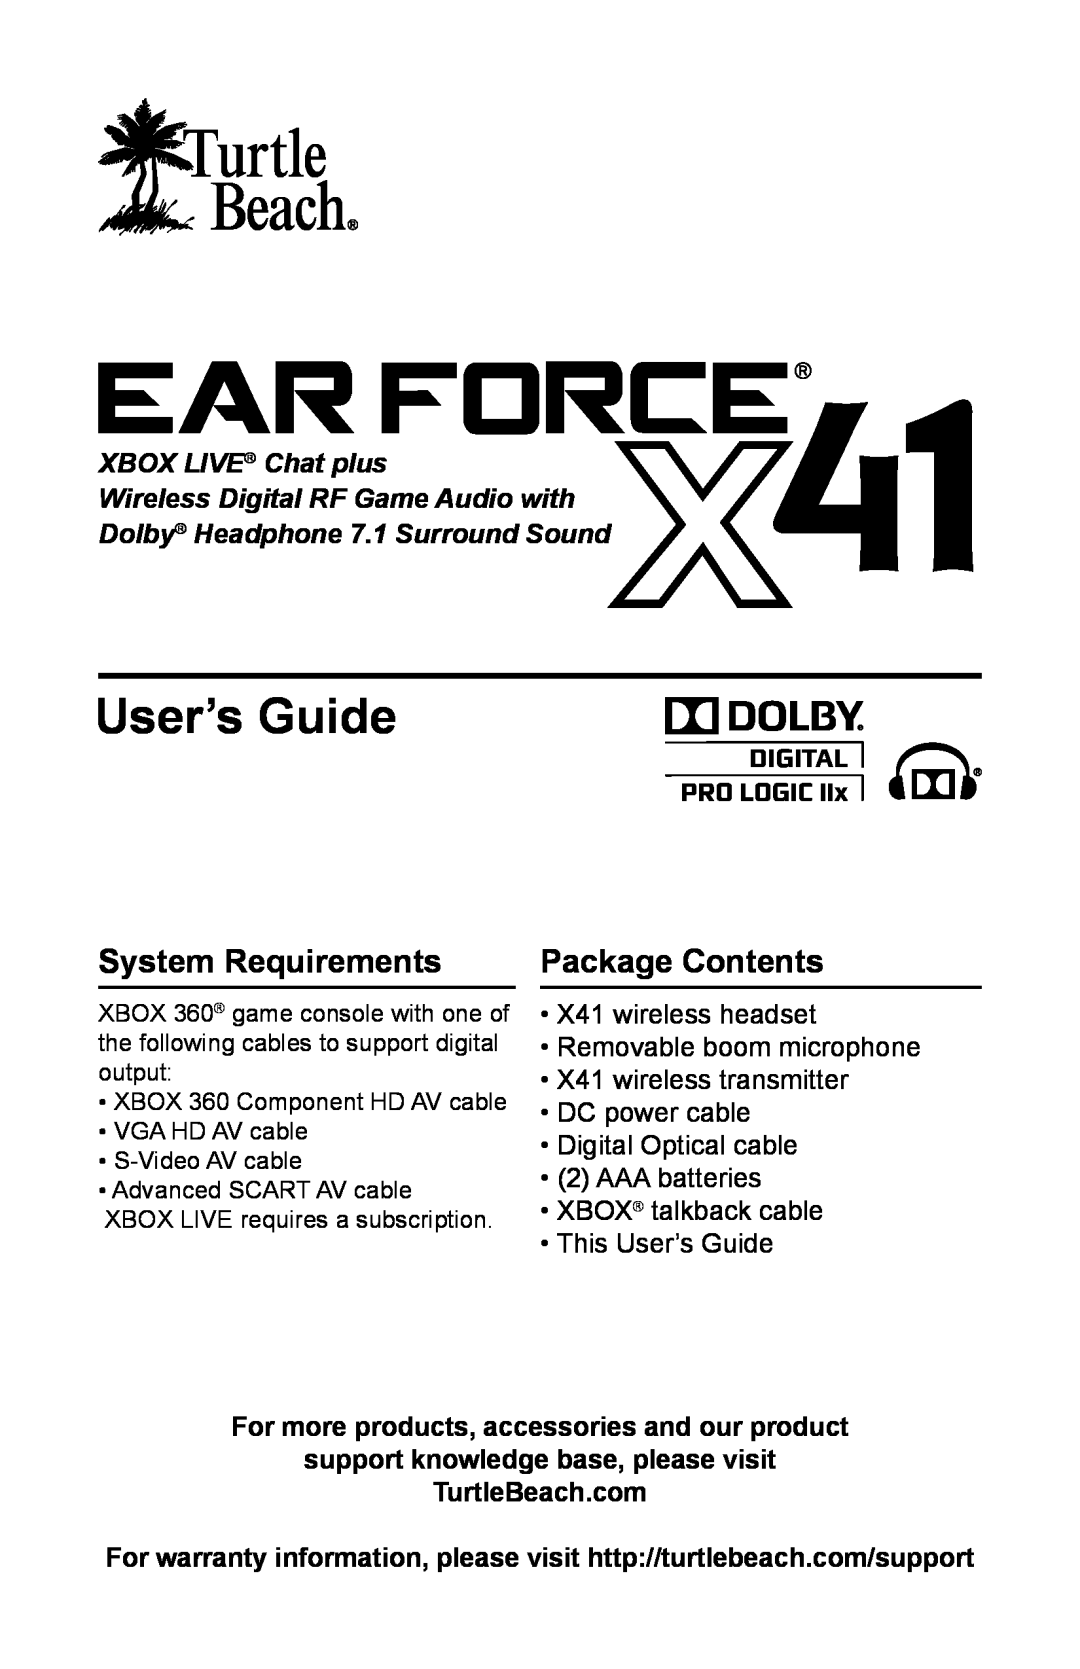 Turtle Beach TBS2170 warranty User’s Guide, System Requirements, Package Contents, XBOX LIVE Chat plus 